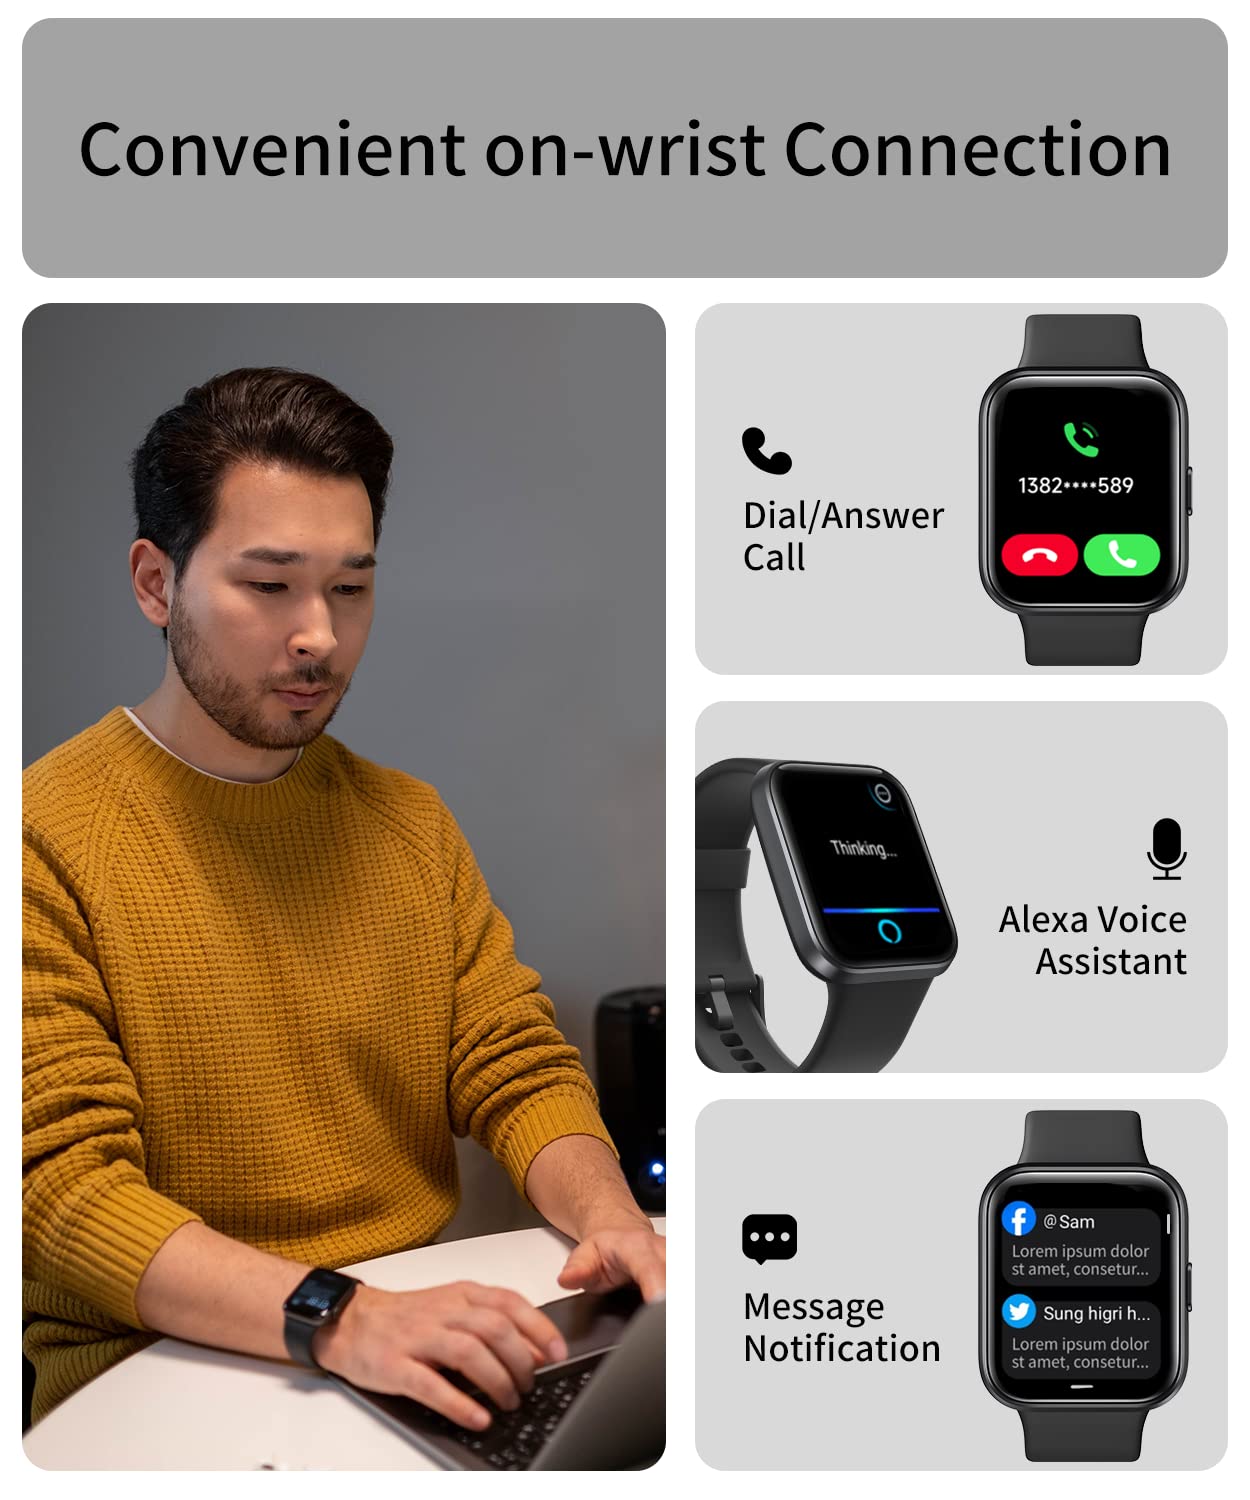 RERE ASW2 Smart Watch (Answer/Make Call), Alexa Built-in, 1.69